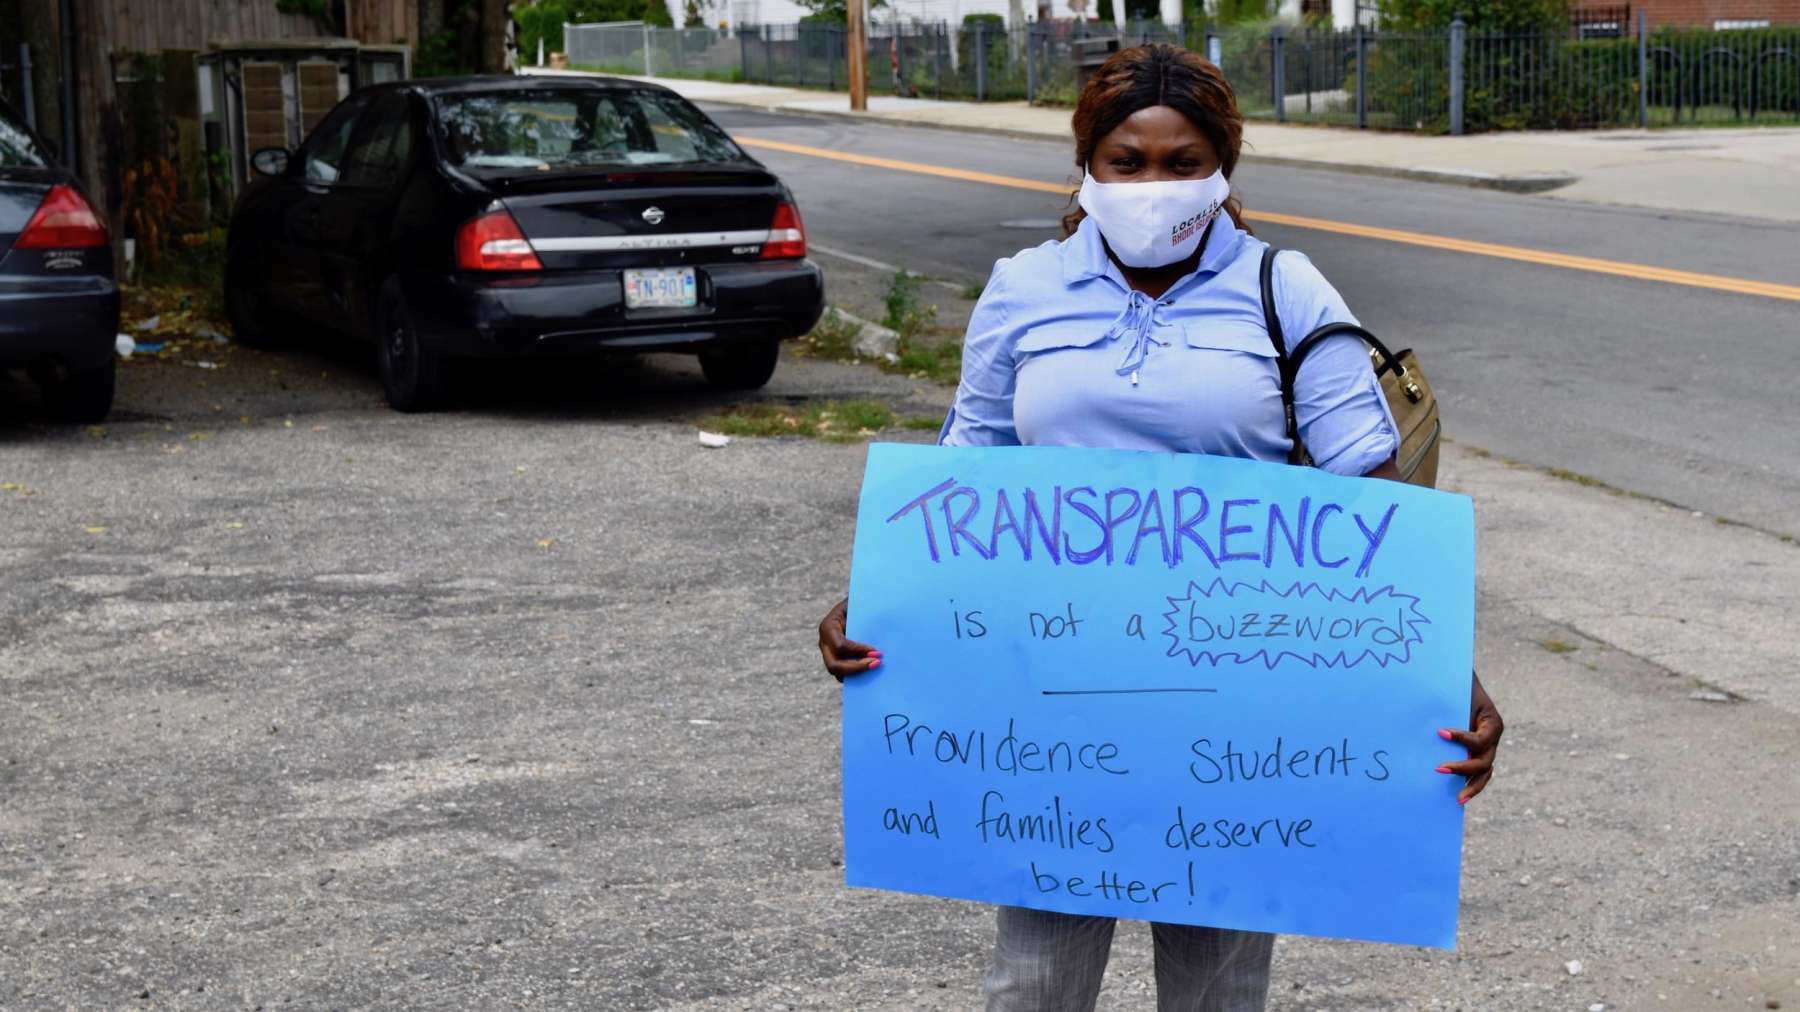 Rhode Island News: Parents demand transparency and options around school reopening